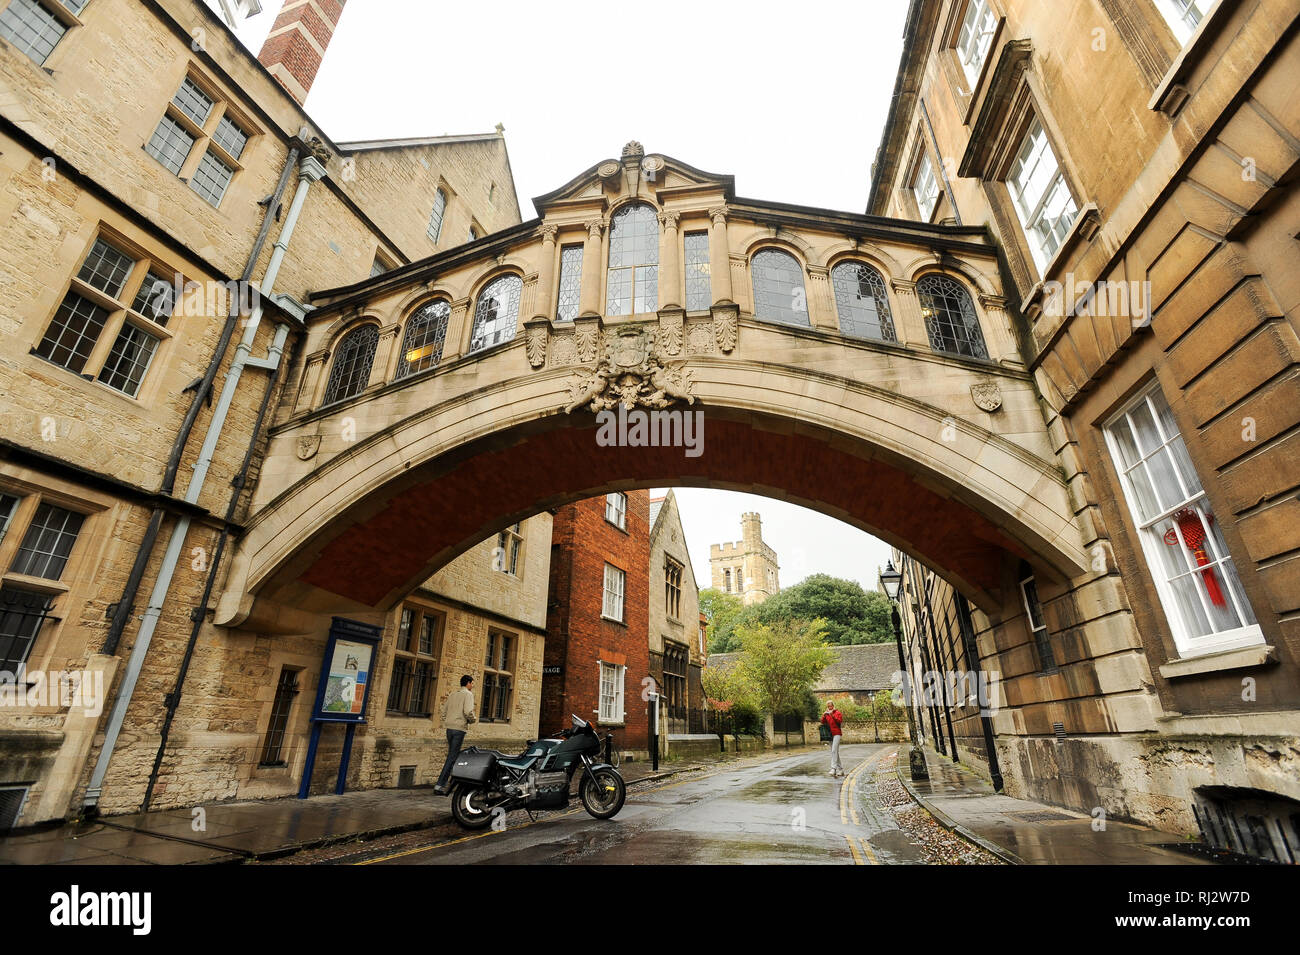 Bridge of Sighs (Hertford Bridge) over New College Lane, Hertford College, University of Oxford one of the oldest universities in the world. Historic  Stock Photo